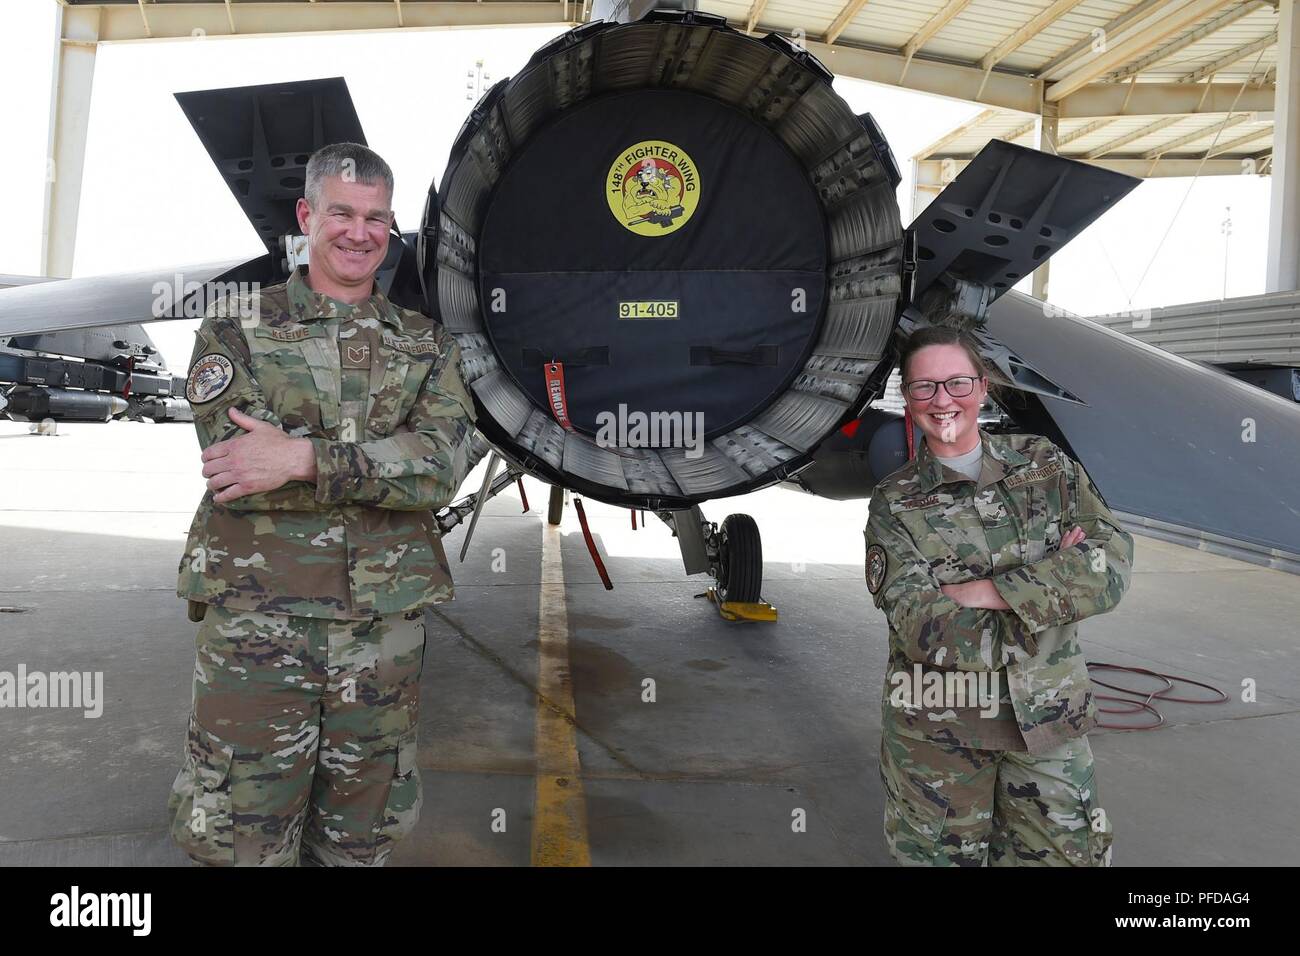 Tech. Sgt. Scott Kleive (left), and his daughter, Airman 1st Class Kalei Kleive, pose for a photograph at an undisclosed location, June 9, 2018. Both are assigned to the 407th Air Expeditionary Group and deployed from the Air National Guard's 148th Fighter Wing in Duluth, Minnesota. Stock Photo